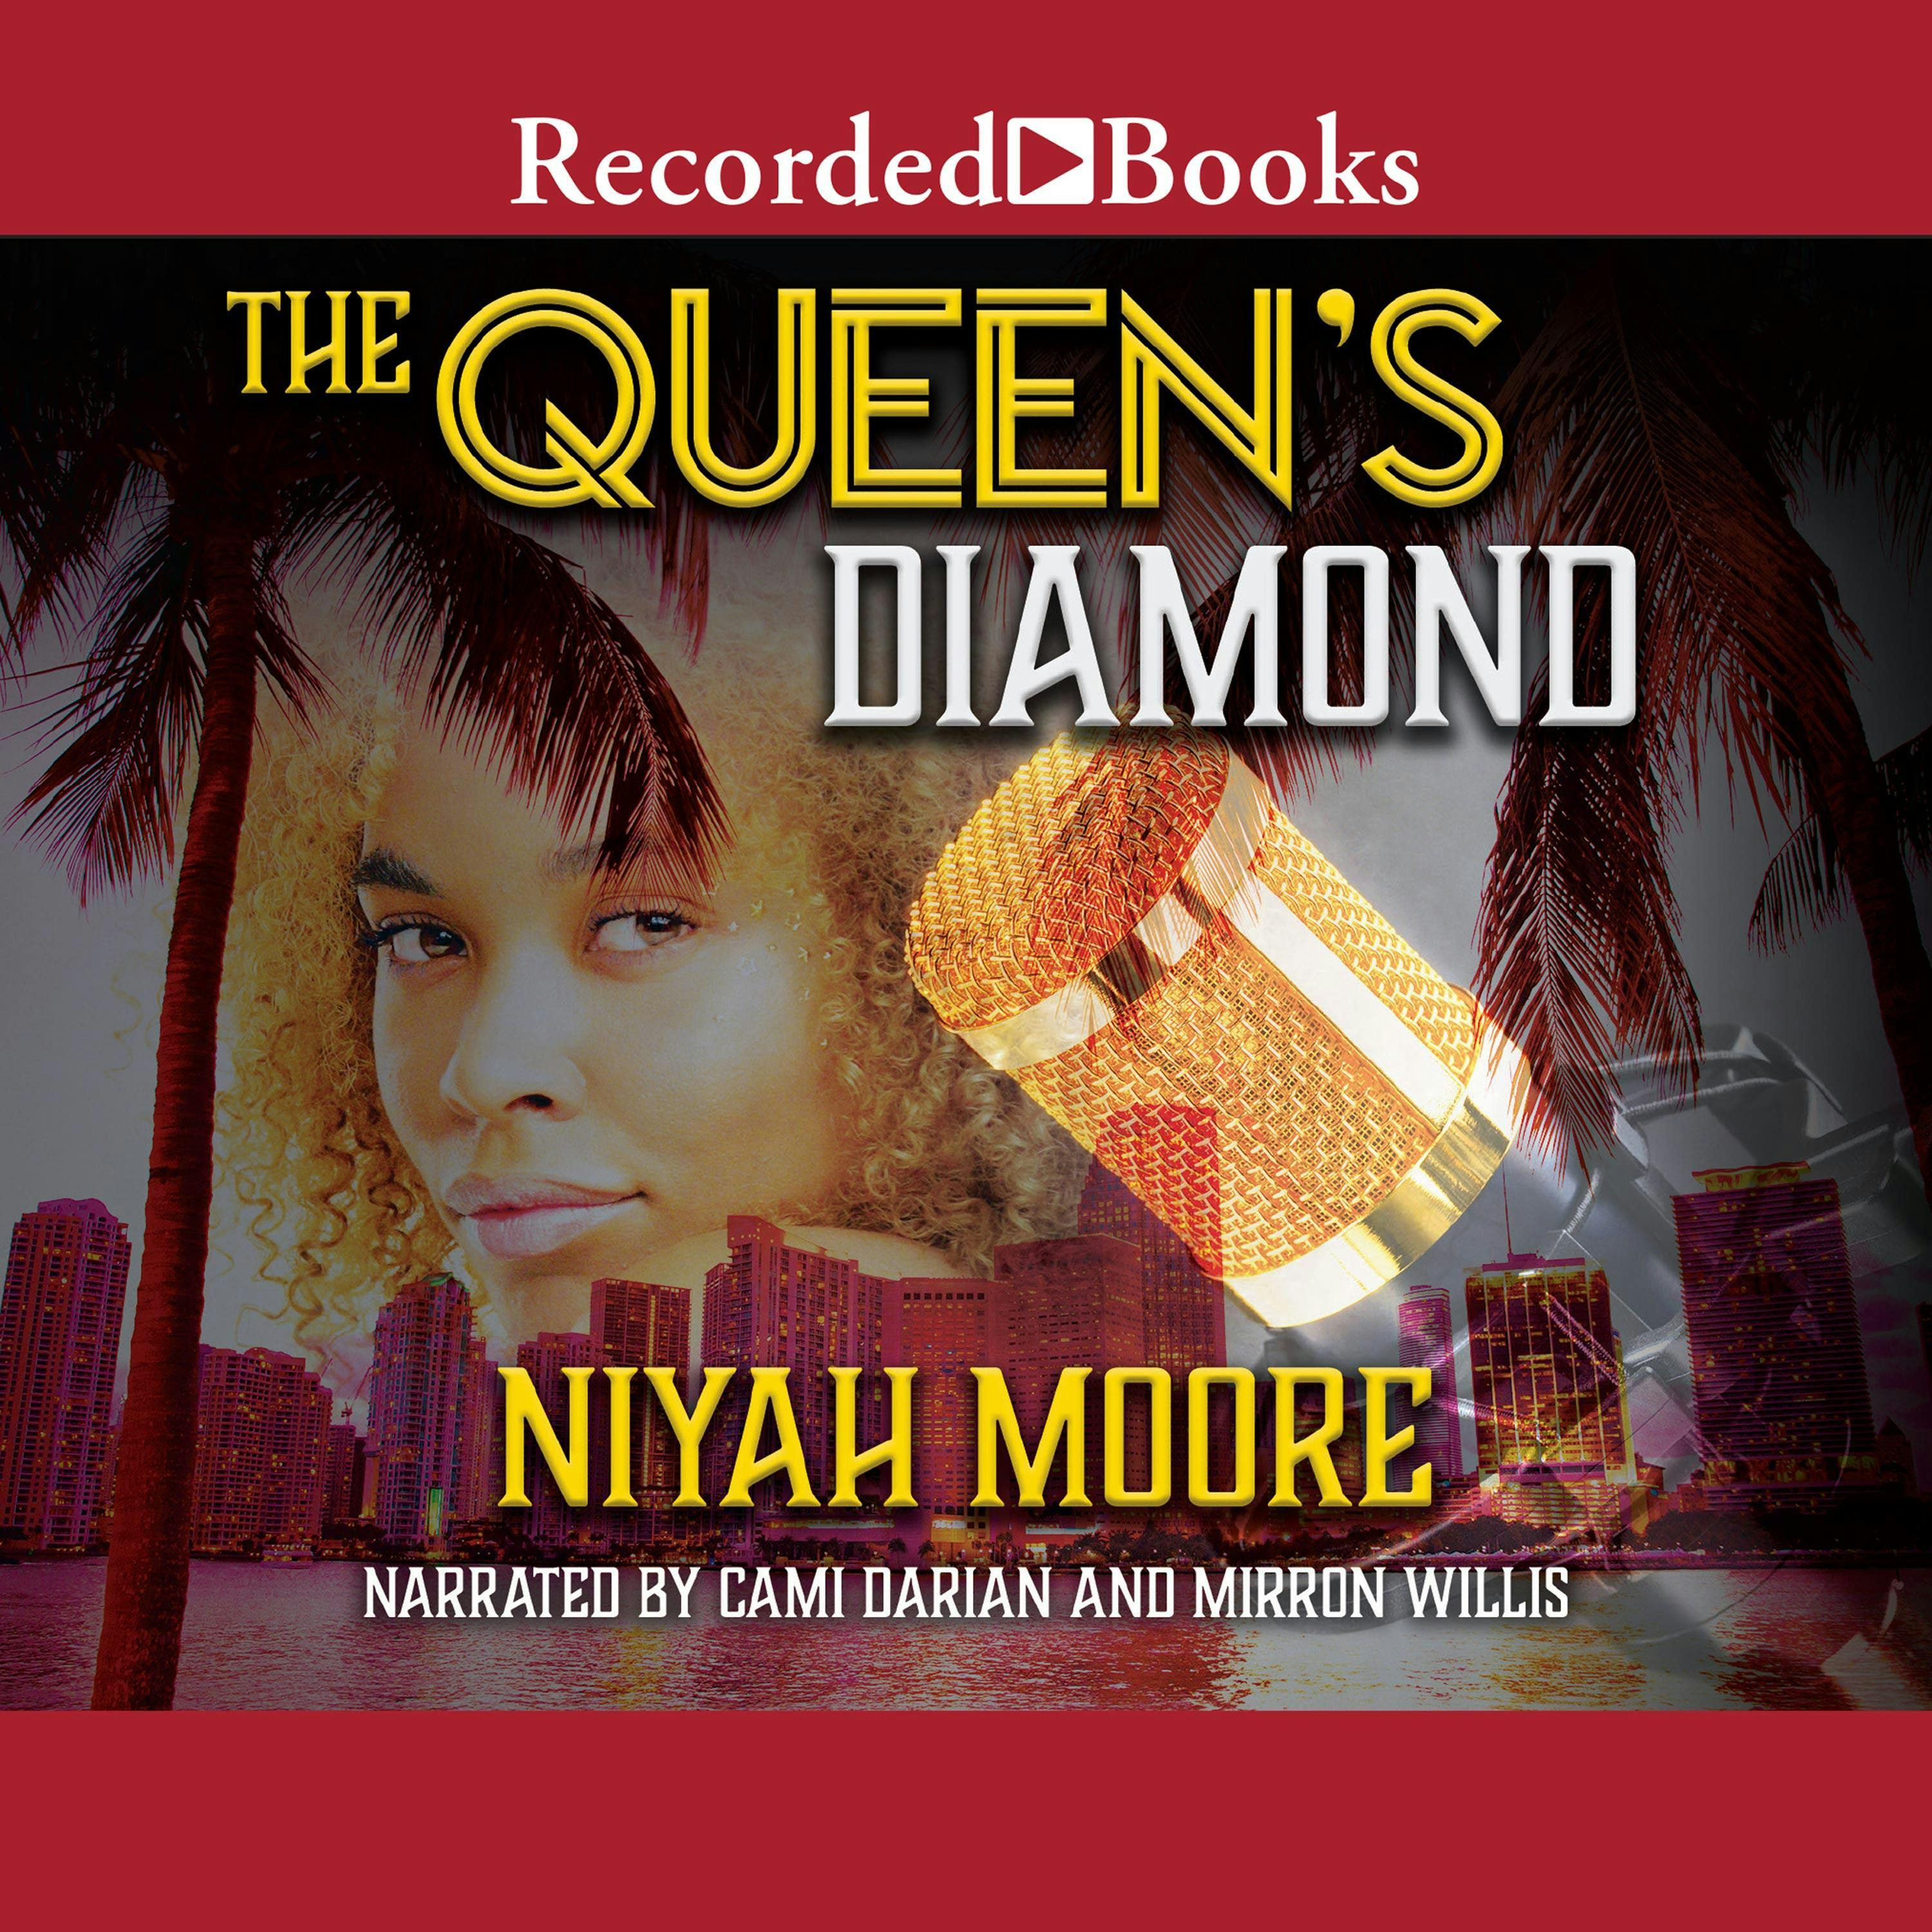 The Queen's Diamond - undefined